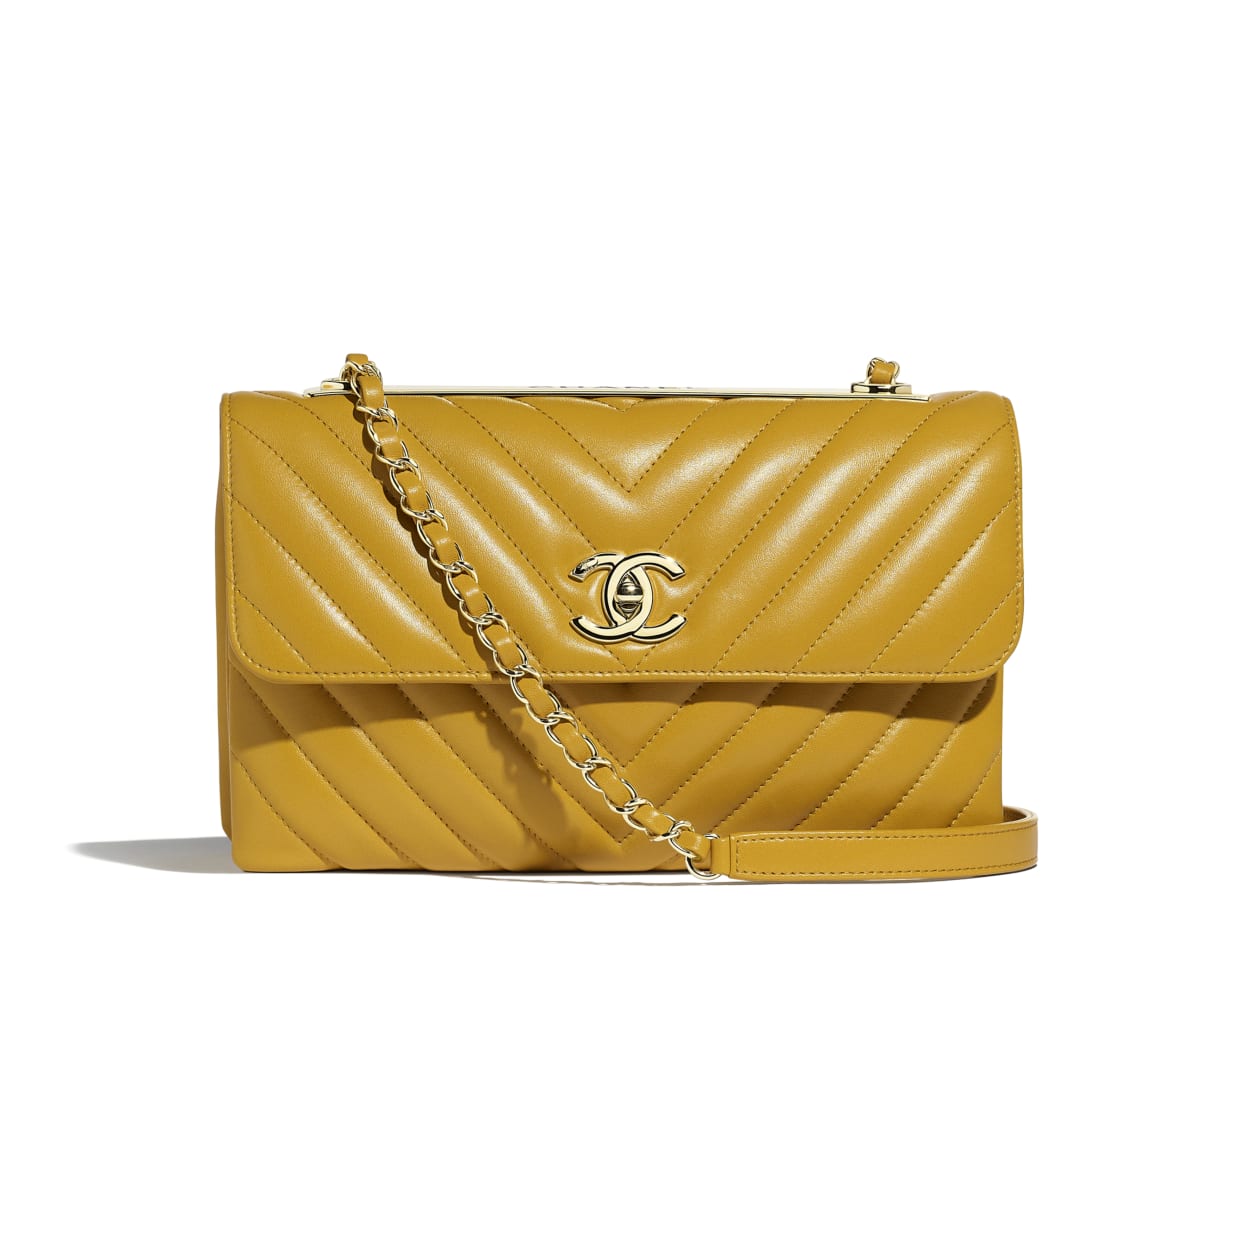 Chanel Fall/Winter 2019 Act 1 Bag Collection - Spotted Fashion